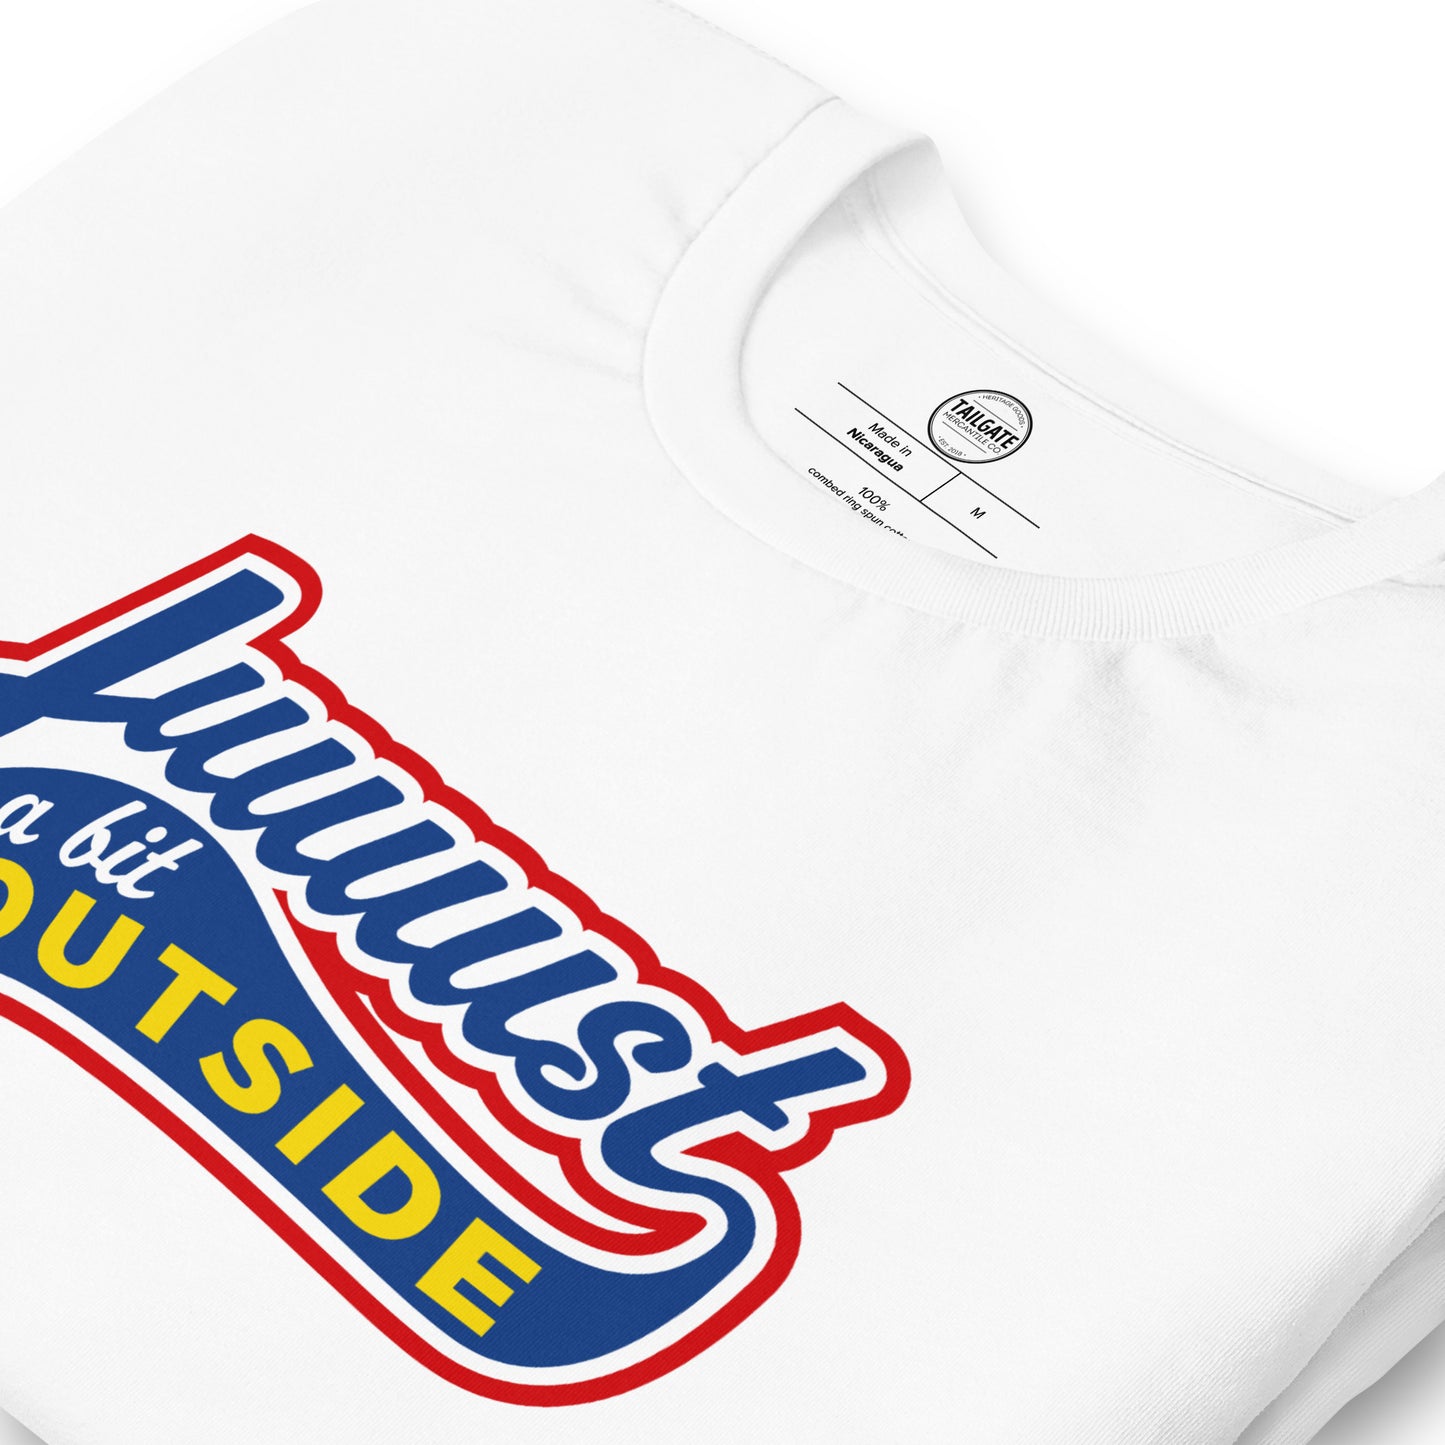 Close up image of white t-shirt with design of "Juuuust a bit Outside" in blue/red/yellow located on centre chest. Just a Bit Outside is an homage to the great baseball movie "Major League". Image includes neck tag information. This design is exclusive to Tailgate Mercantile and available only online.